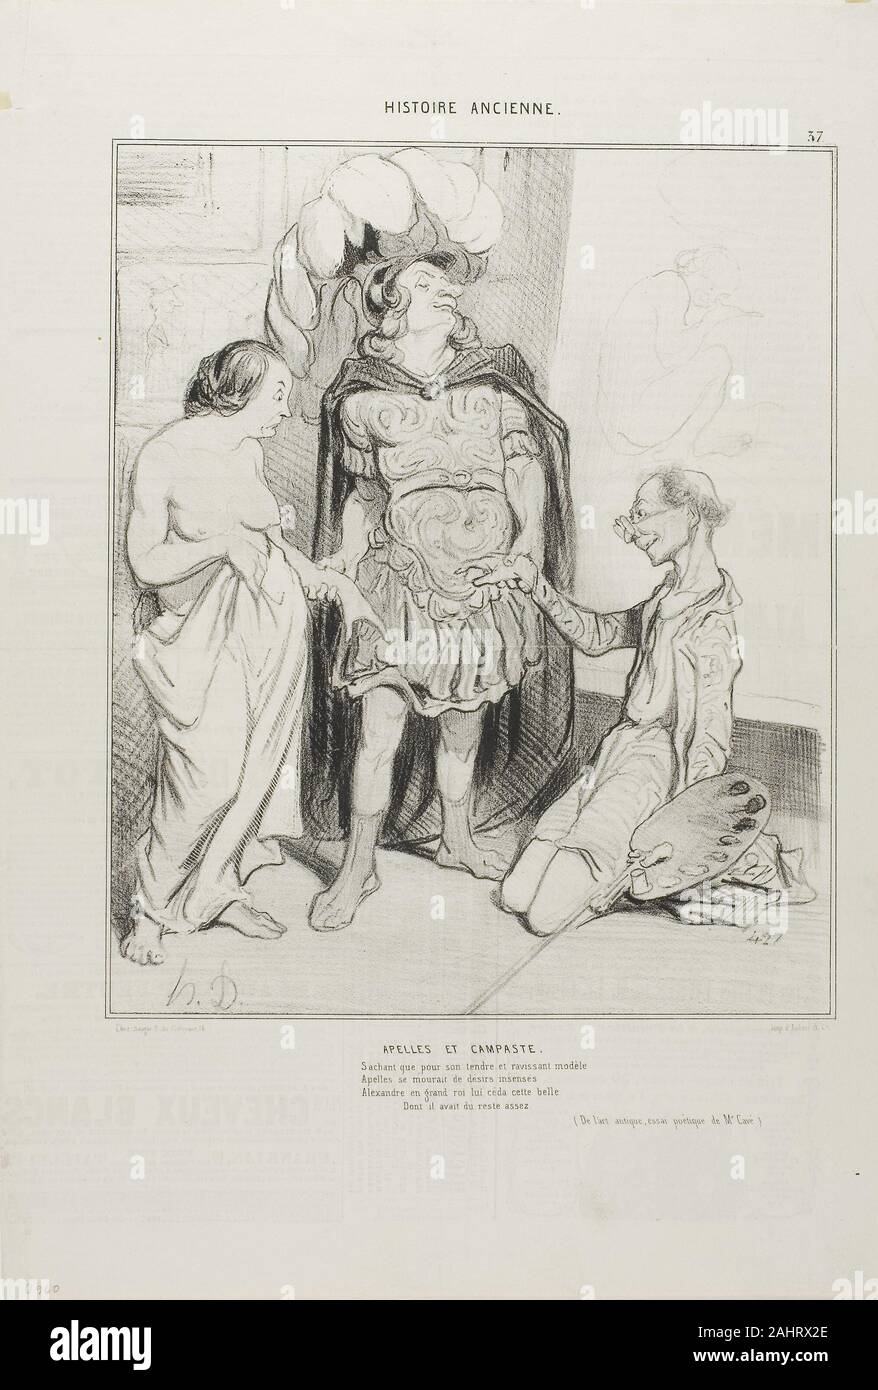 Honoré-Victorin Daumier. Apelles and Campaste. Aware that Apelles was wasting away with love Alexander gave him Campeste and above the first art deal ever now was struck girlfriend against sculpture, oh what luck! (From Art and the Antique, a poetic essay by M. Cavé), plate 36(37) from Histoire Ancienne. 1842. France. Lithograph in black, with scraping on stone on cream wove paper, with text added in another hand and letterpress verso Here Daumier humorously described the love triangle between Alexander the Great, his mistress Campaspe, and the painter Apelles. On Alexander’s request, Apelles Stock Photo